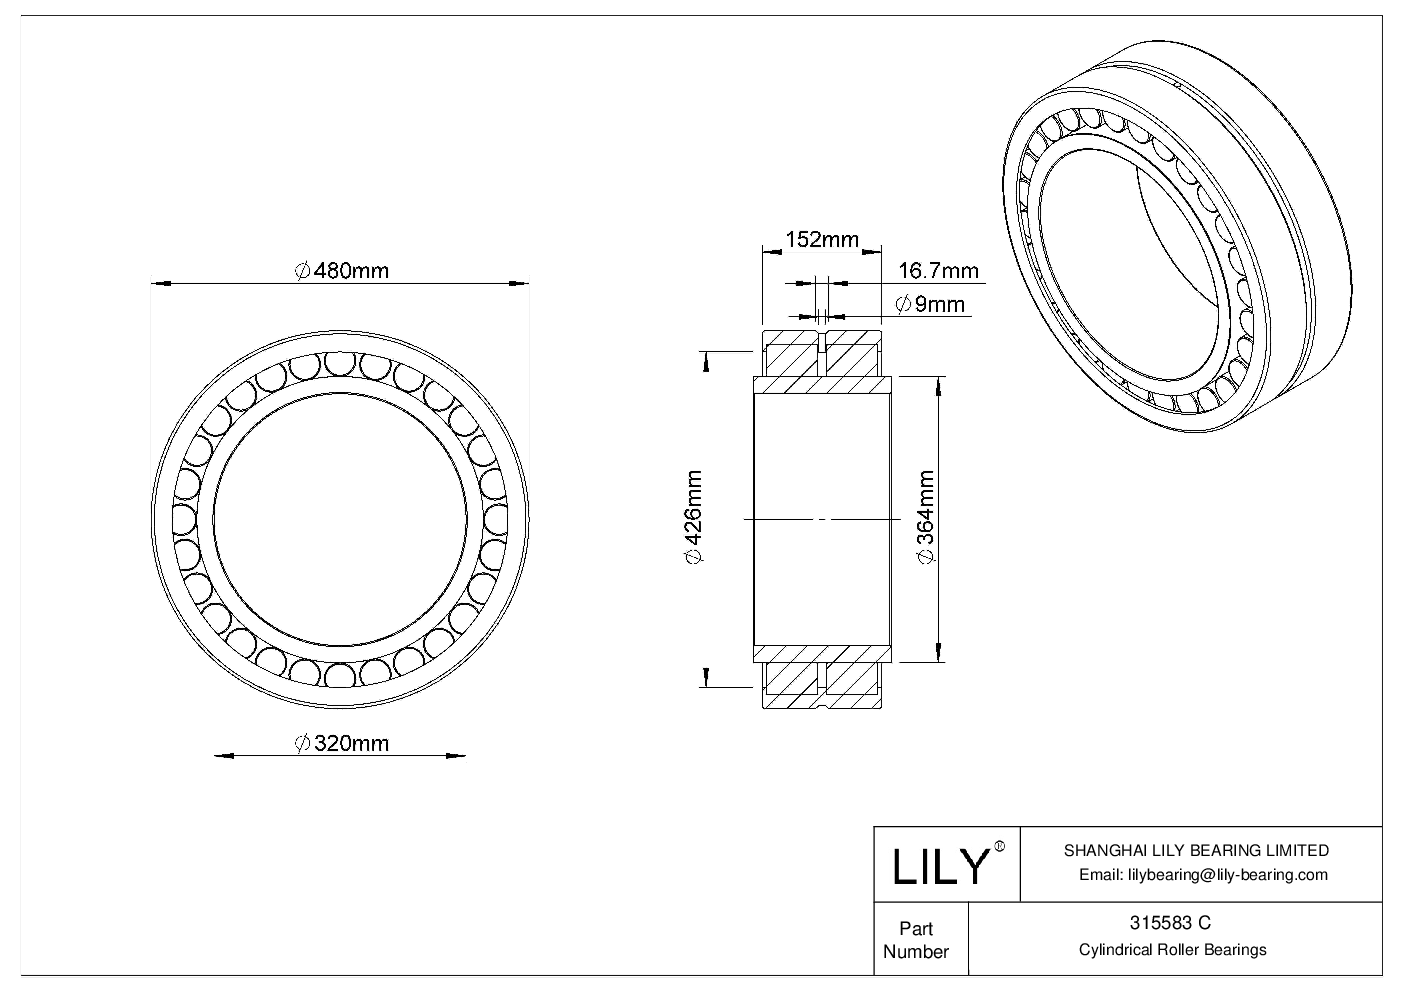 315583 C Double Row Cylindrical Roller Bearings cad drawing